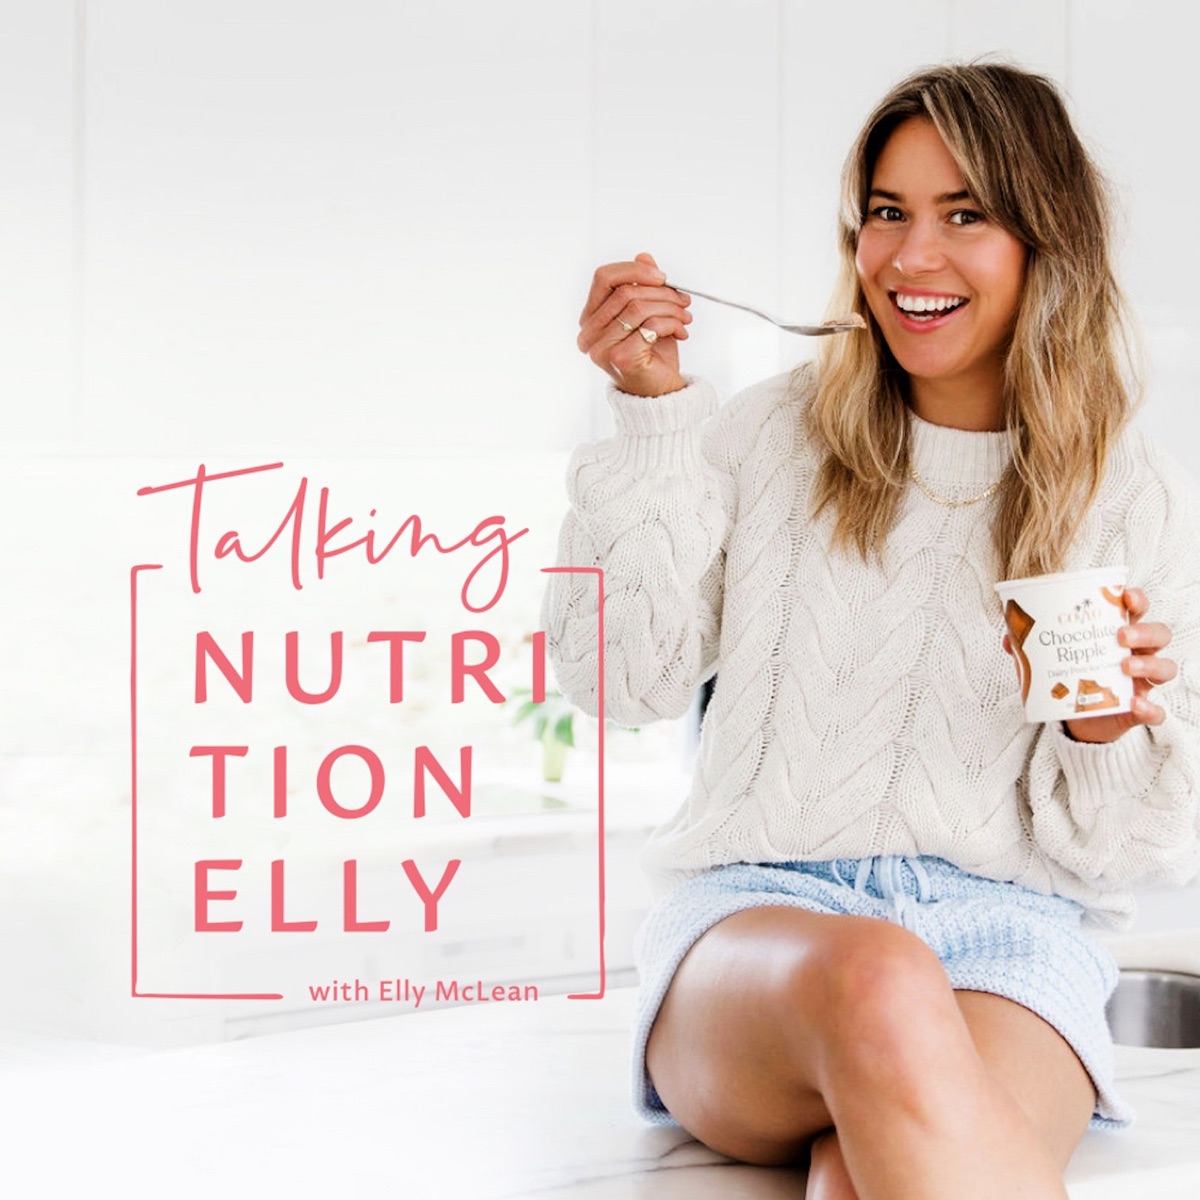 Steph Lowe - Nutritionist & Mentor on Instagram: I have a